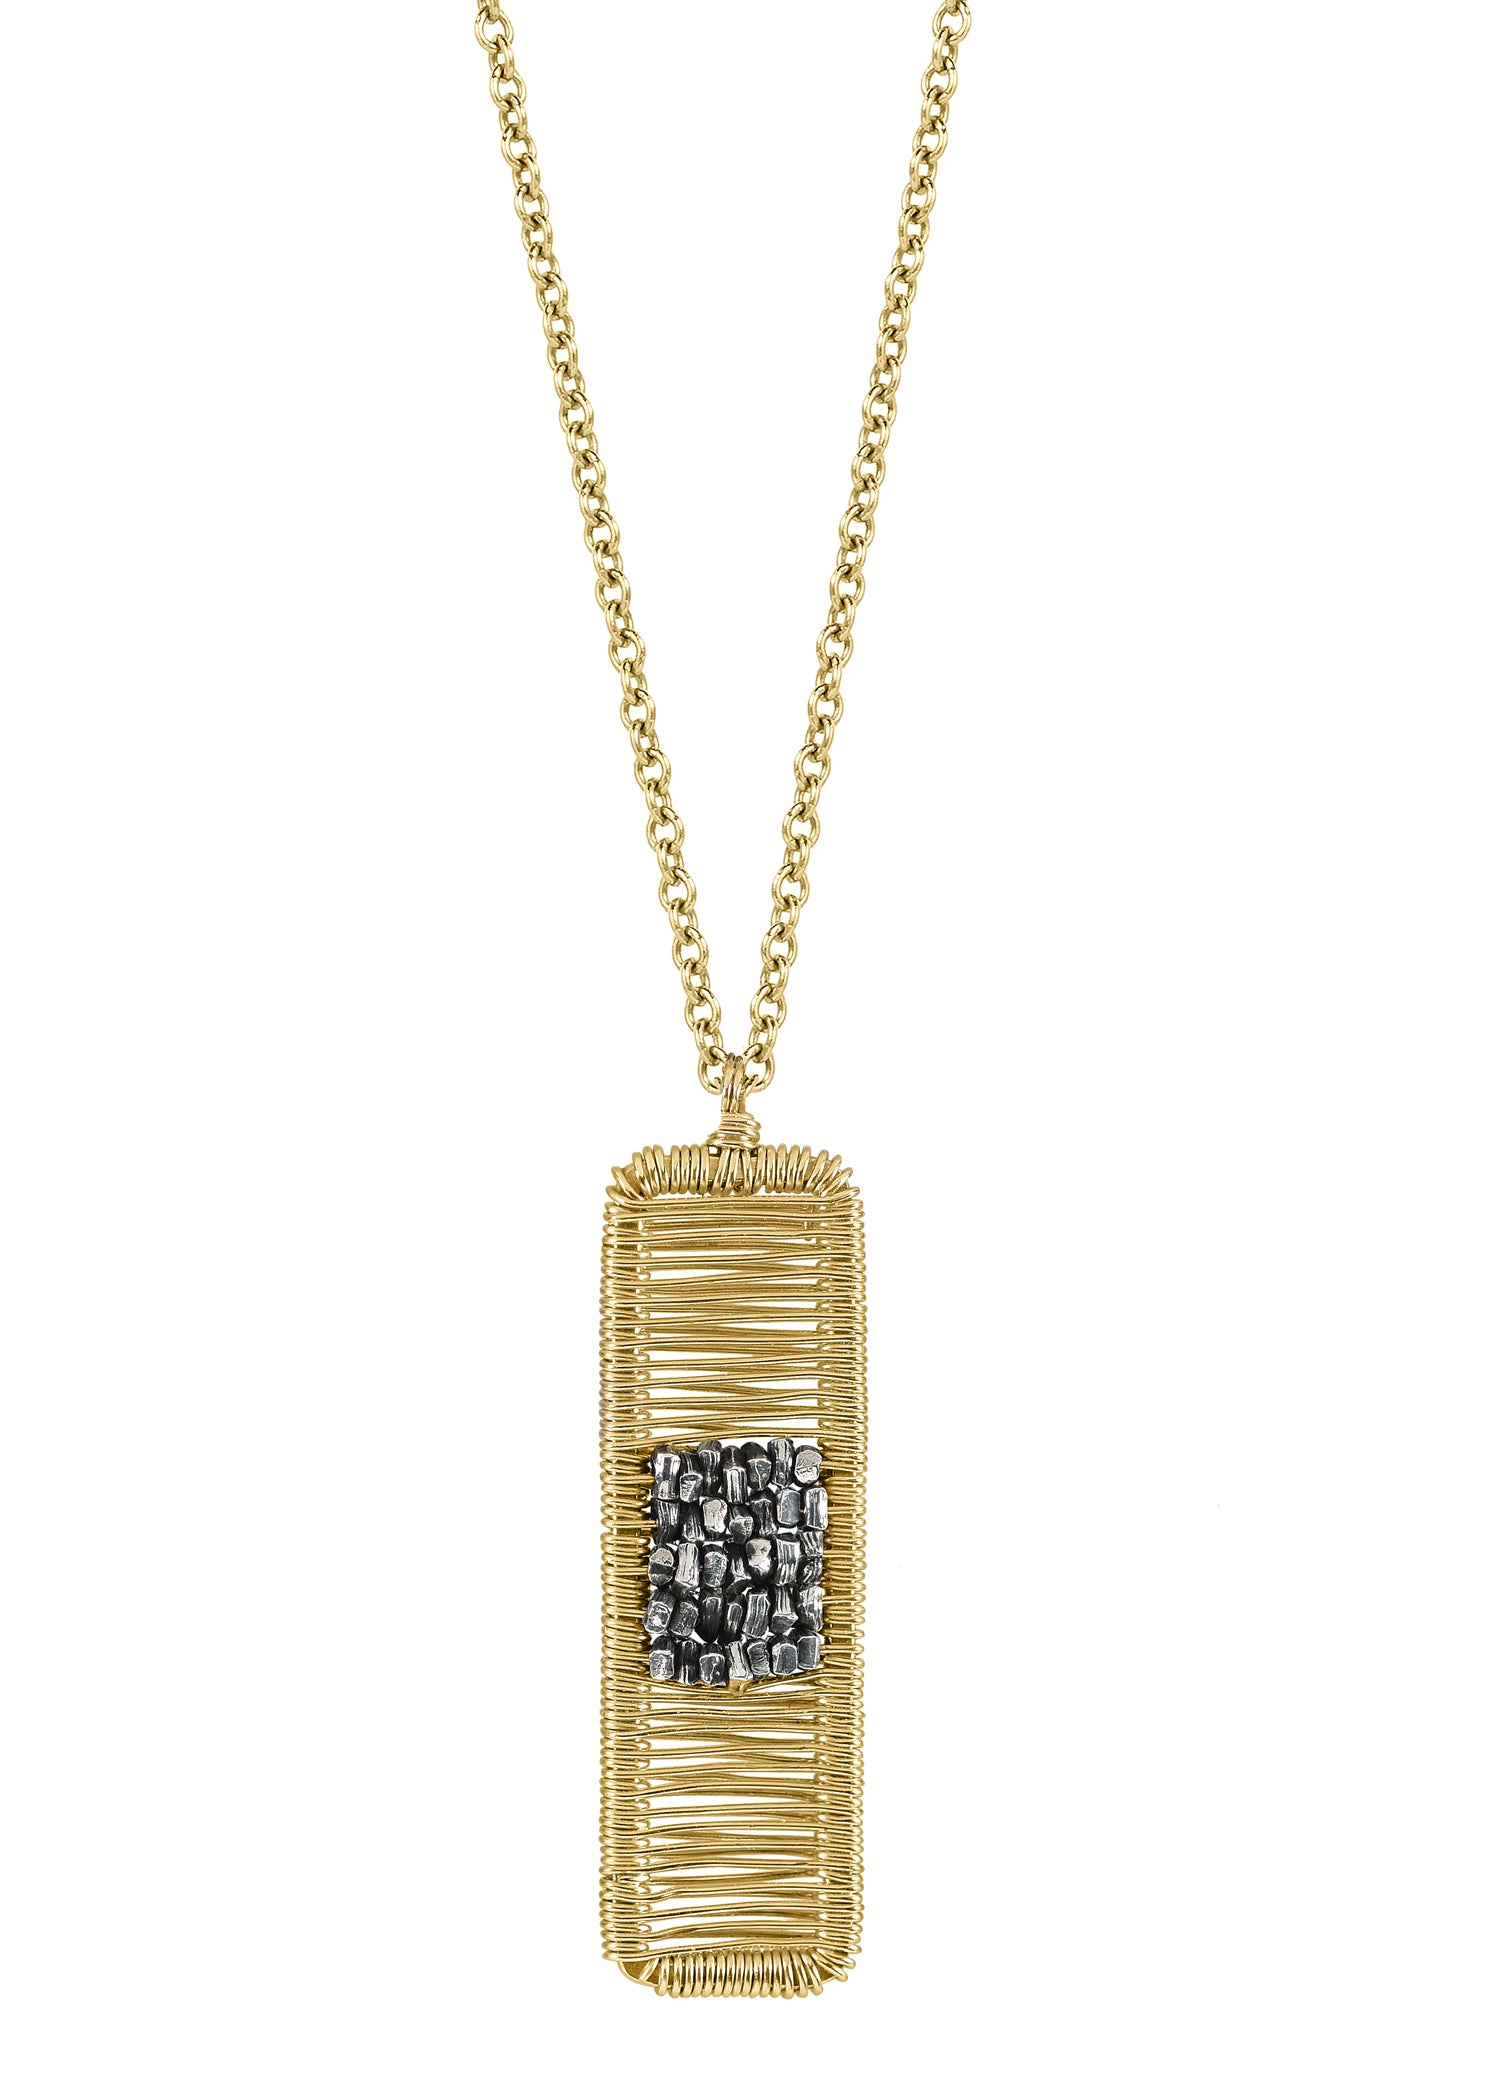 14k gold fill Sterling silver Mixed metal Necklace measures 17" in length Pendant measures 1" in length and 5/16" in width Handmade in our Los Angeles studio